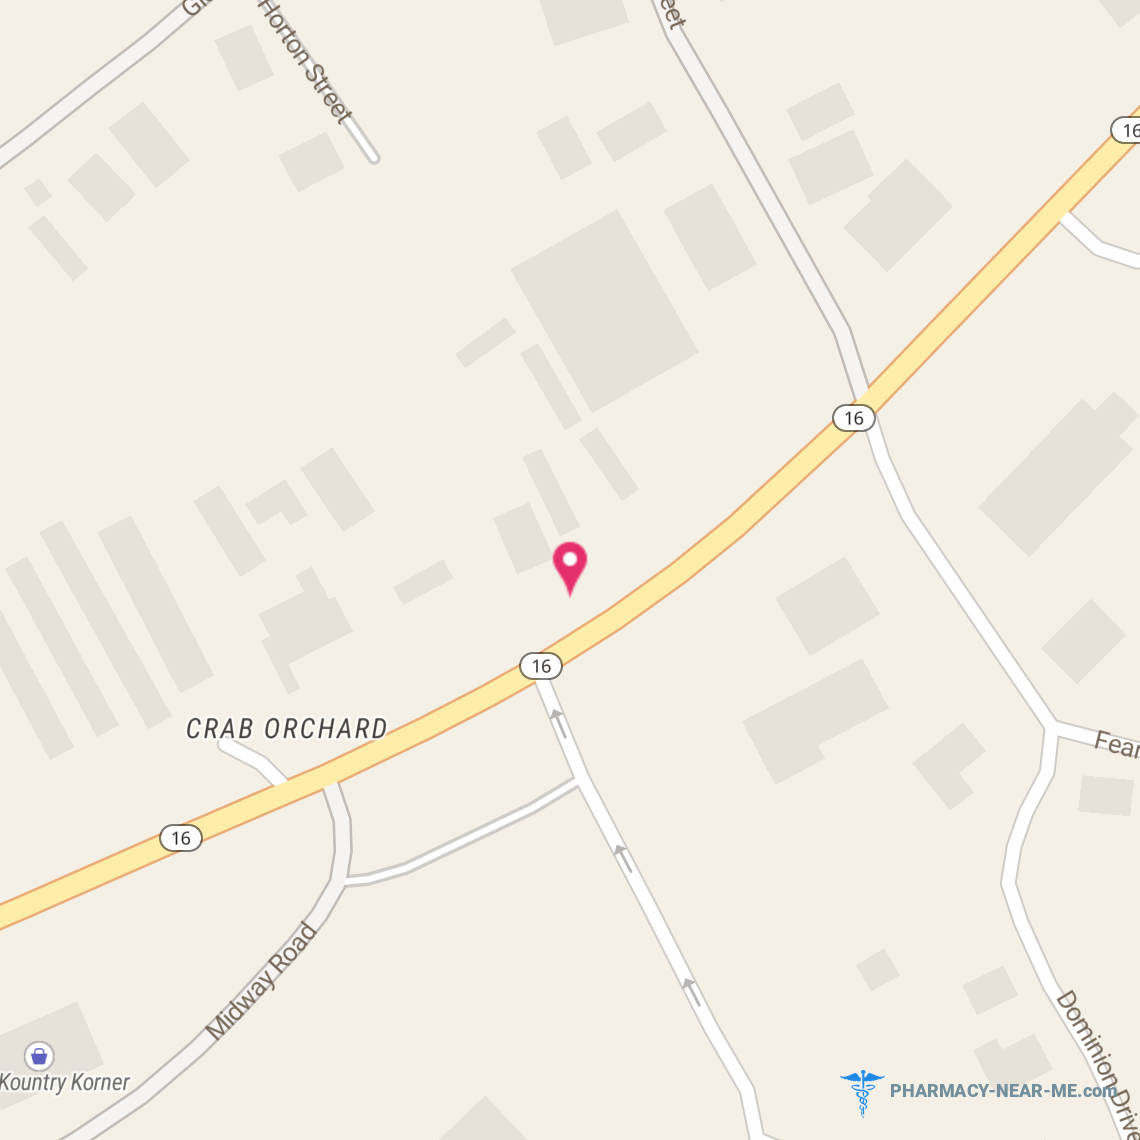 CRAB ORCHARD PHARMACY - Pharmacy Hours, Phone, Reviews & Information: 1299 Robert C Byrd Drive, Crab Orchard, West Virginia 25827, United States